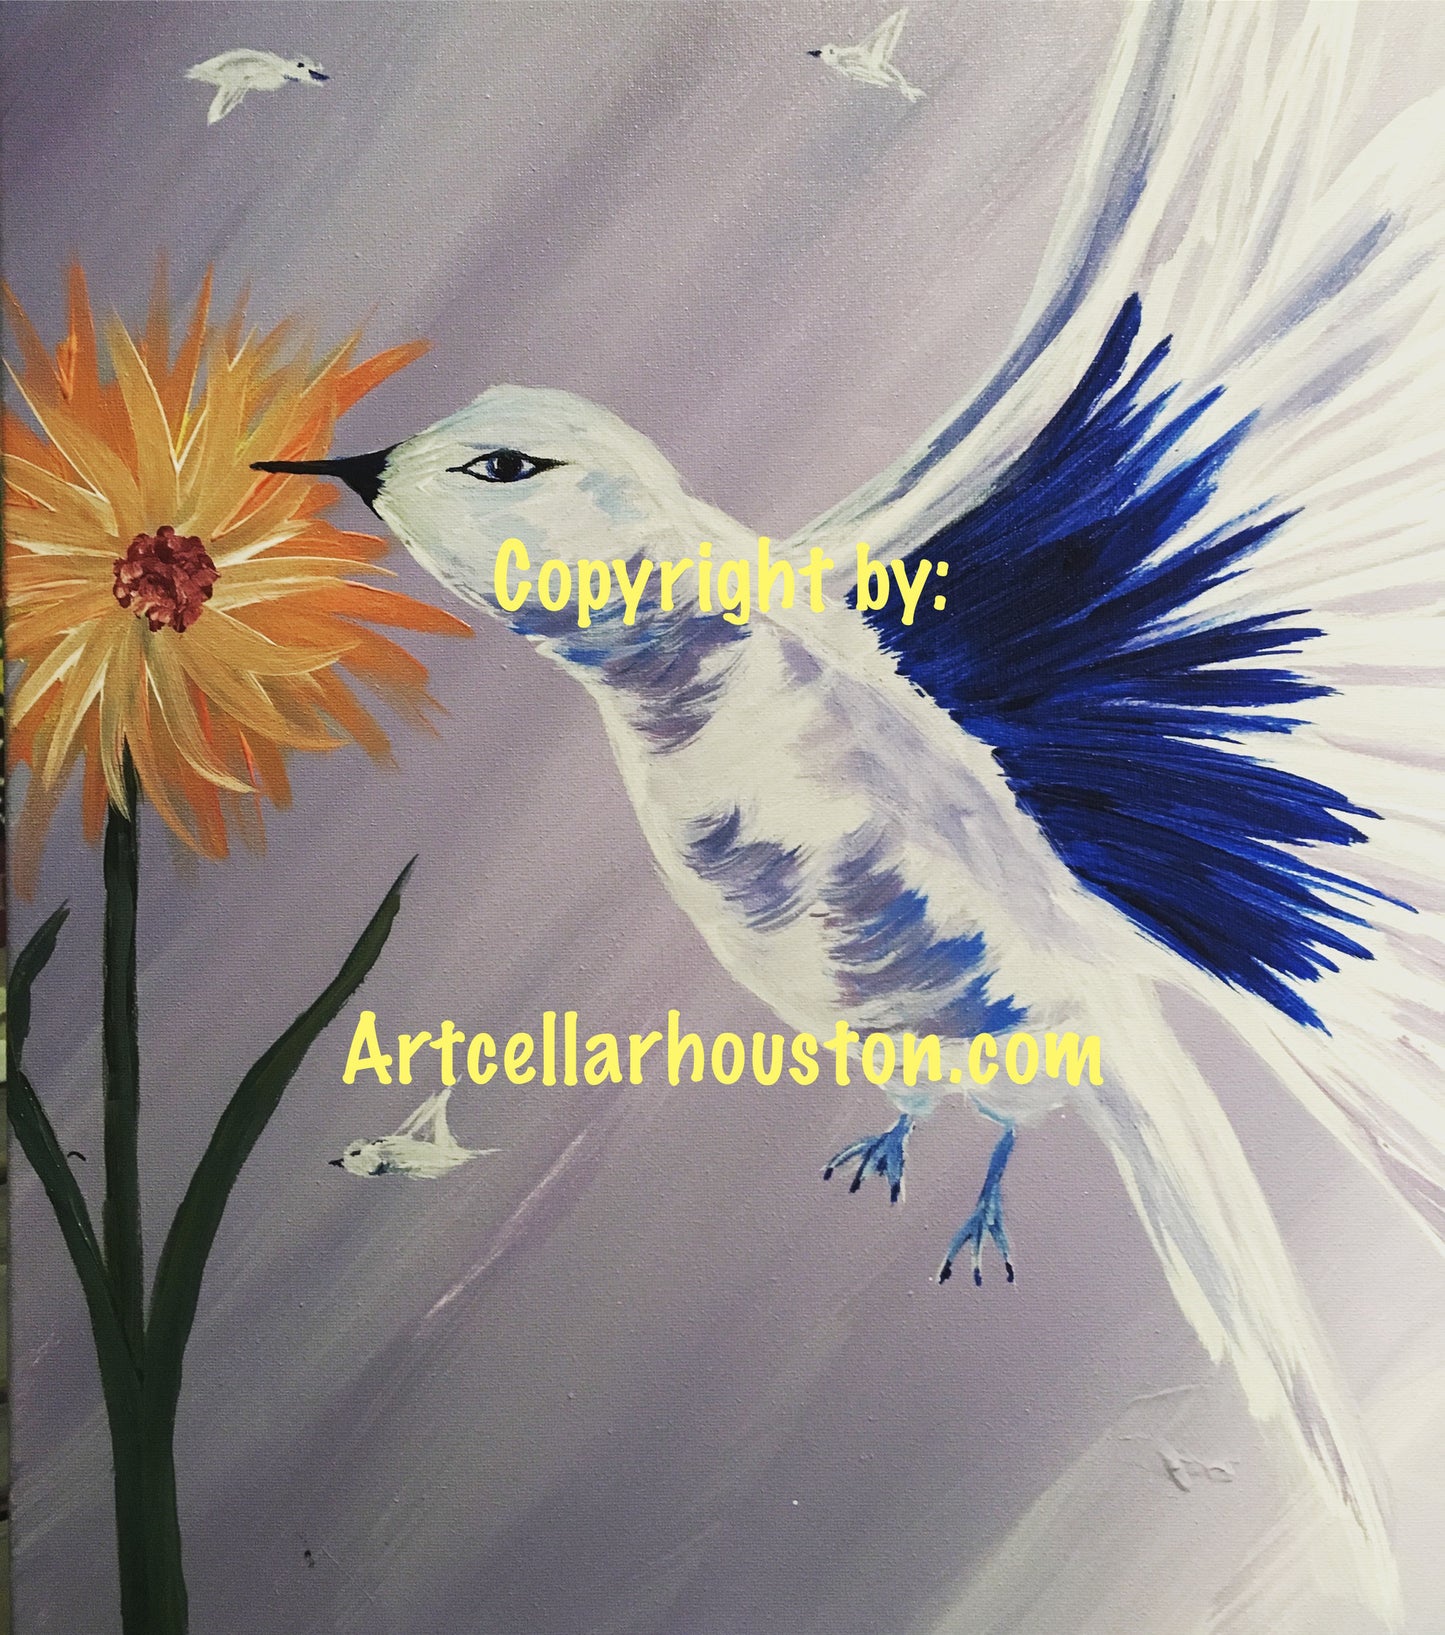 Wed, May 24, 330-5pm Kids Paint “Birds in Flight” Houston Public Painting Class